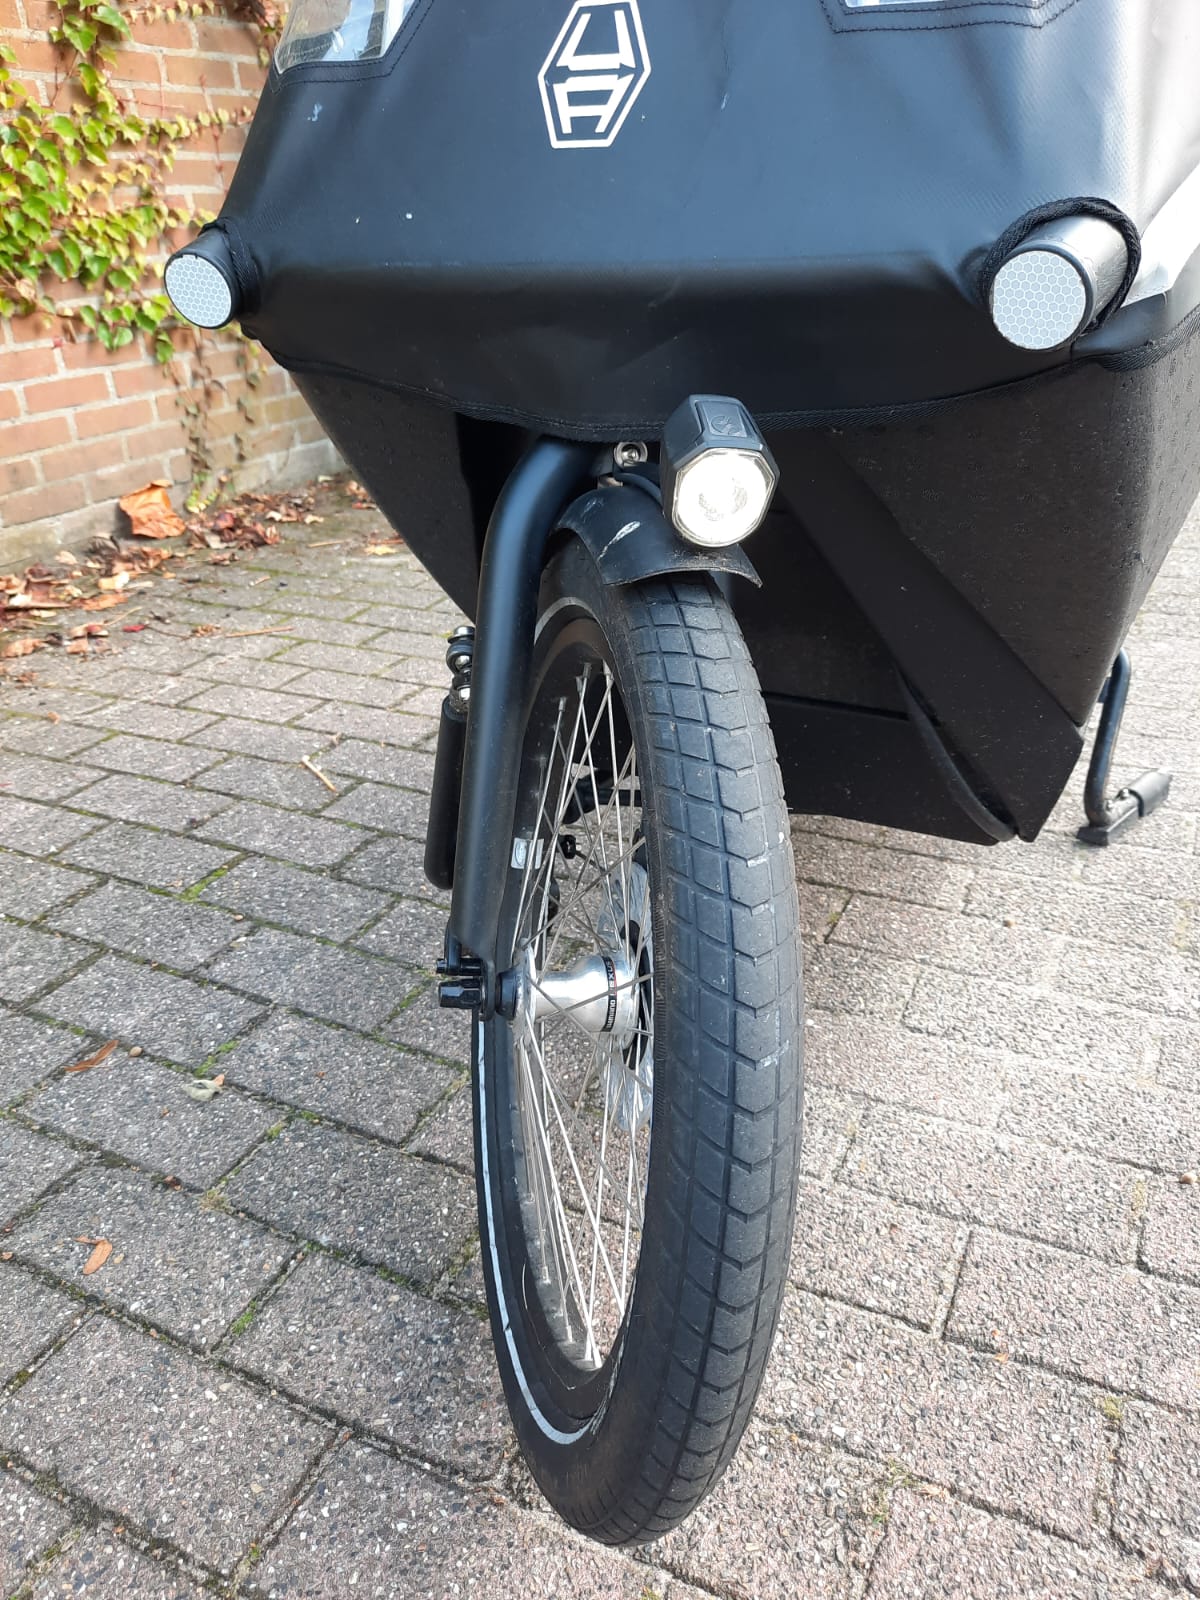 The light sits on the front wheel